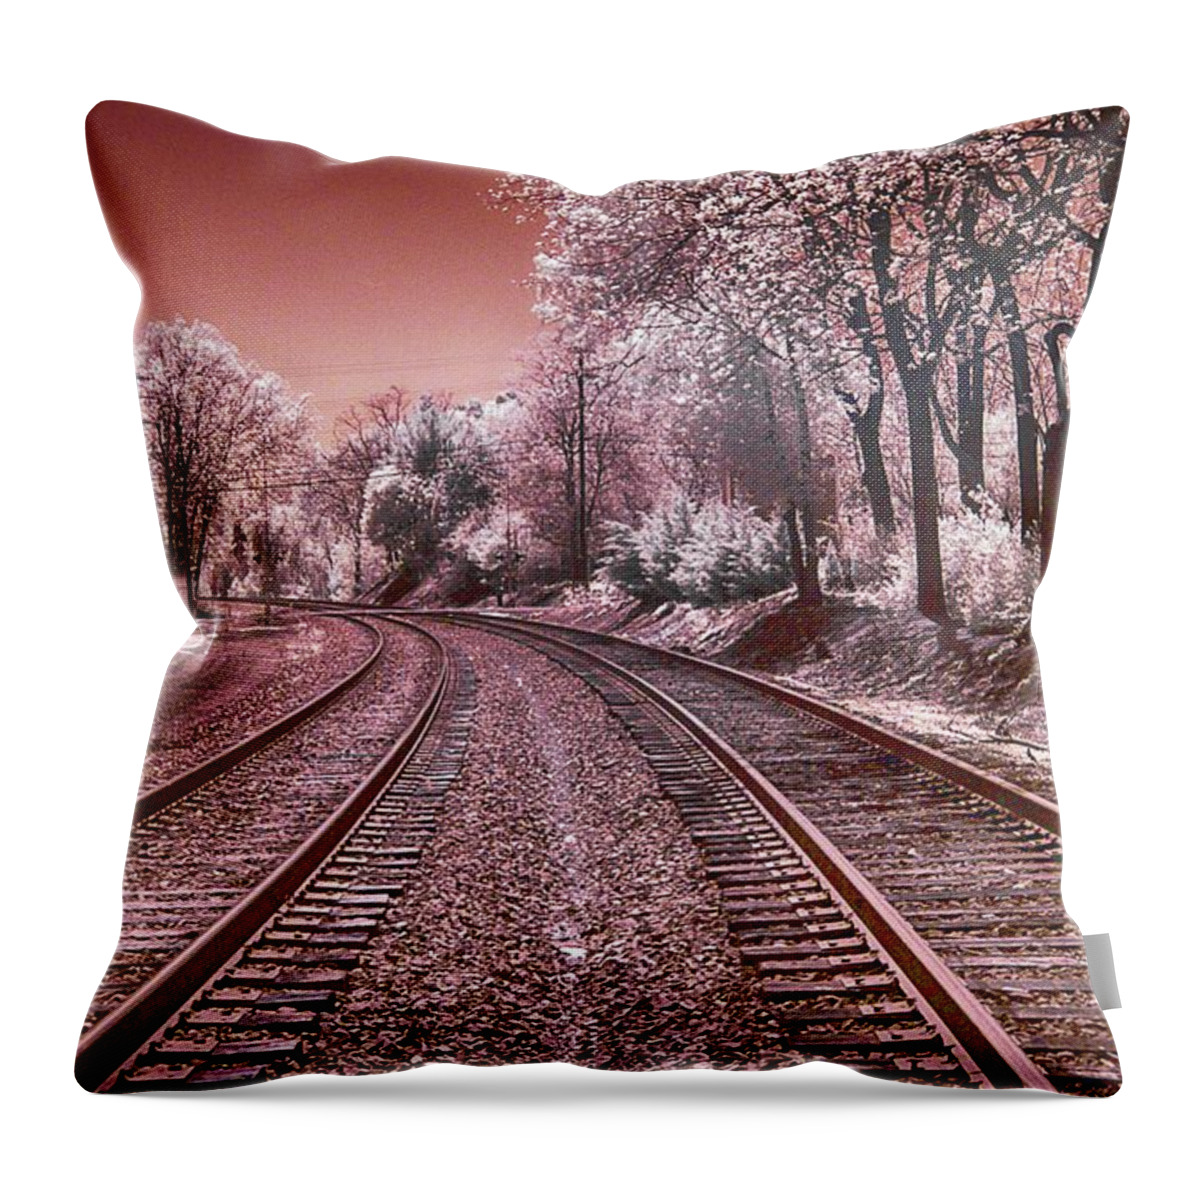 Infrared Throw Pillow featuring the photograph Train Tracks in Culpeper - Infrared Sepia by Anthony M Davis